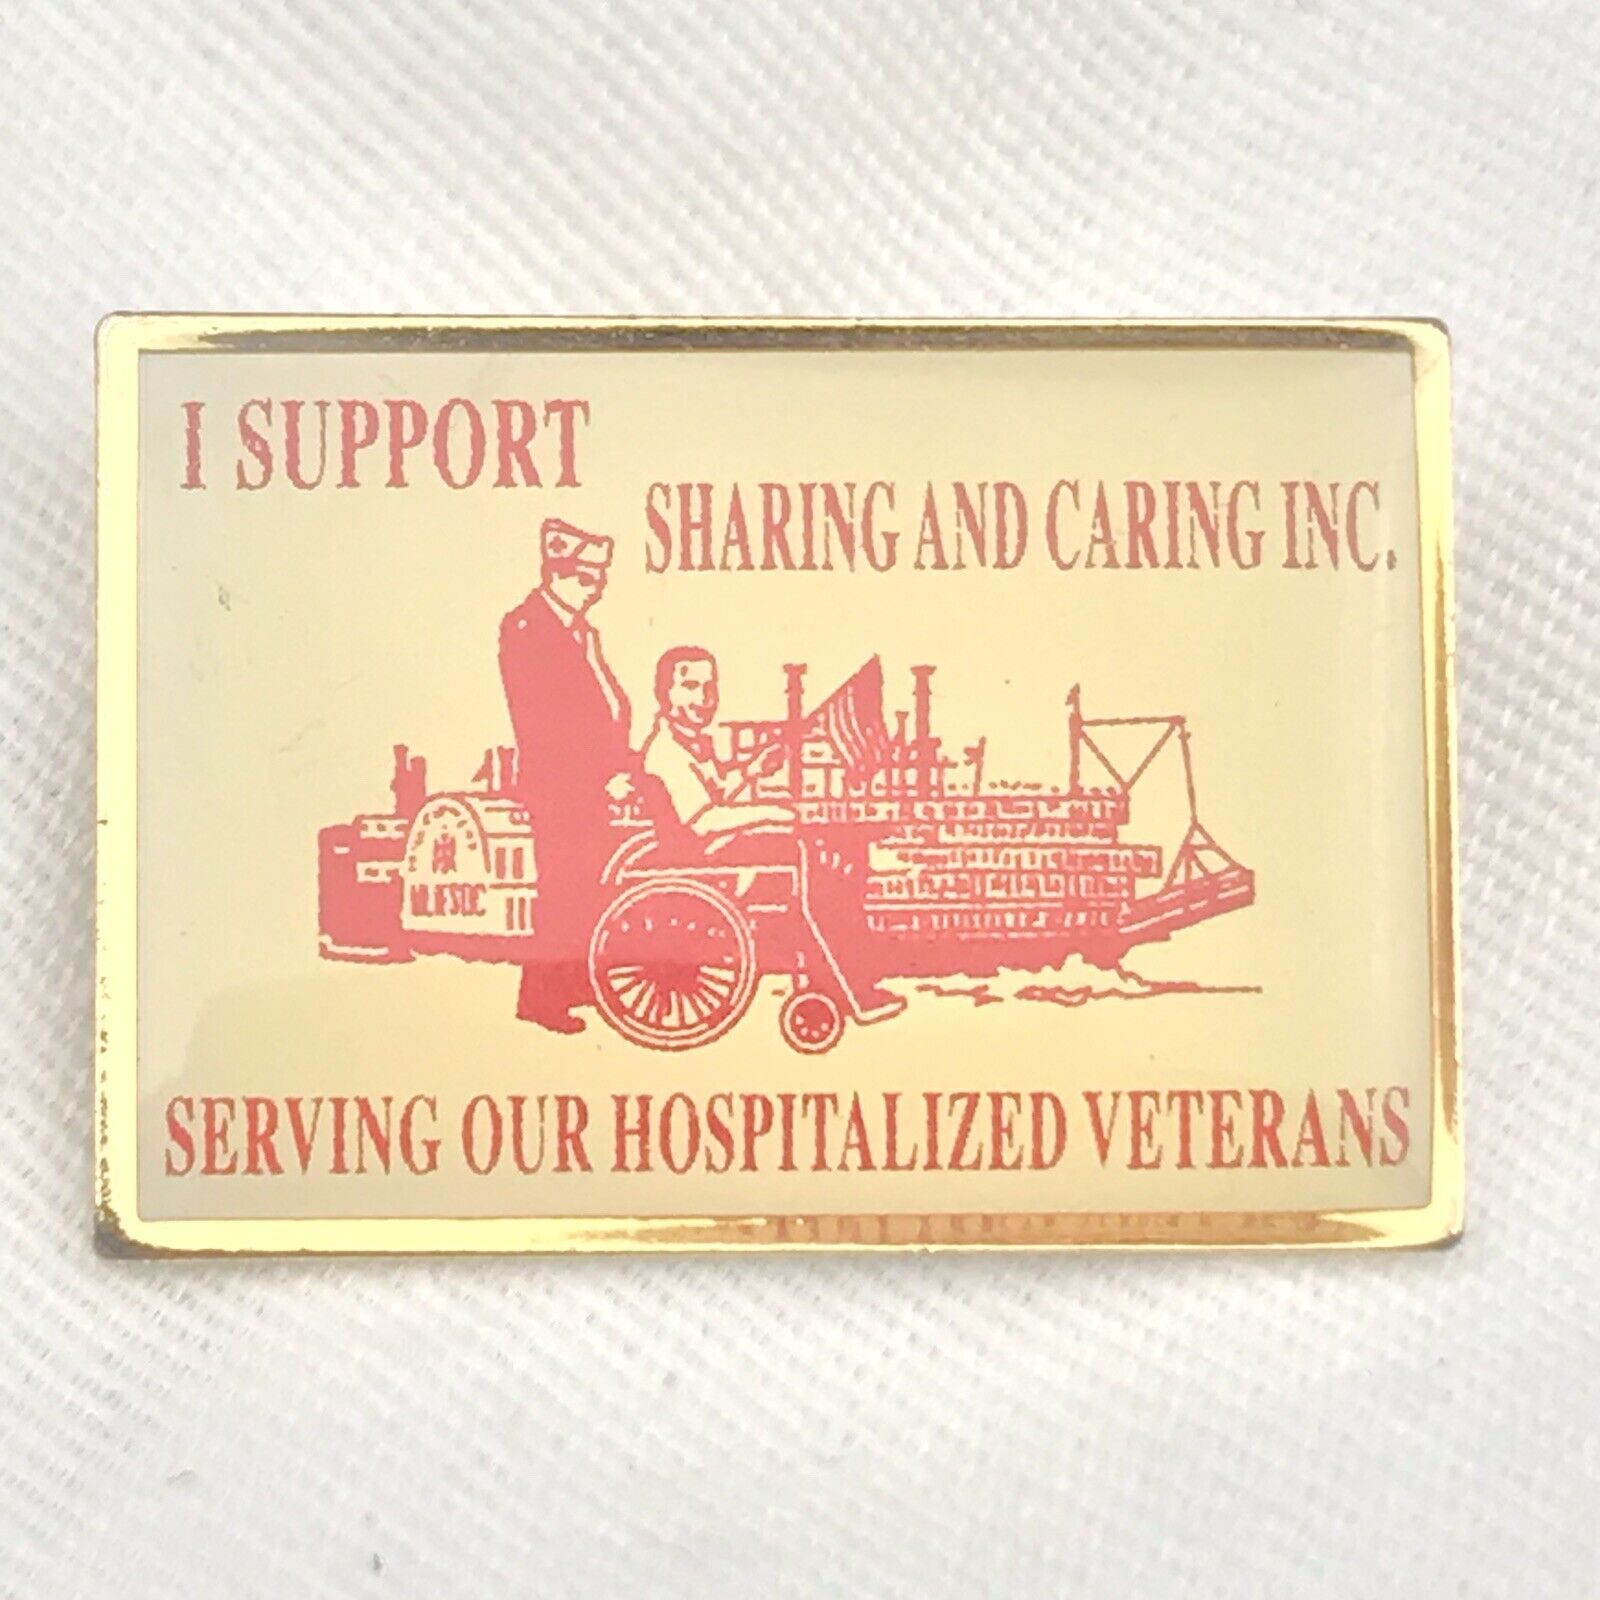 Standing Up For Hospitalized Veterans Pin Sharing And Caring Inc